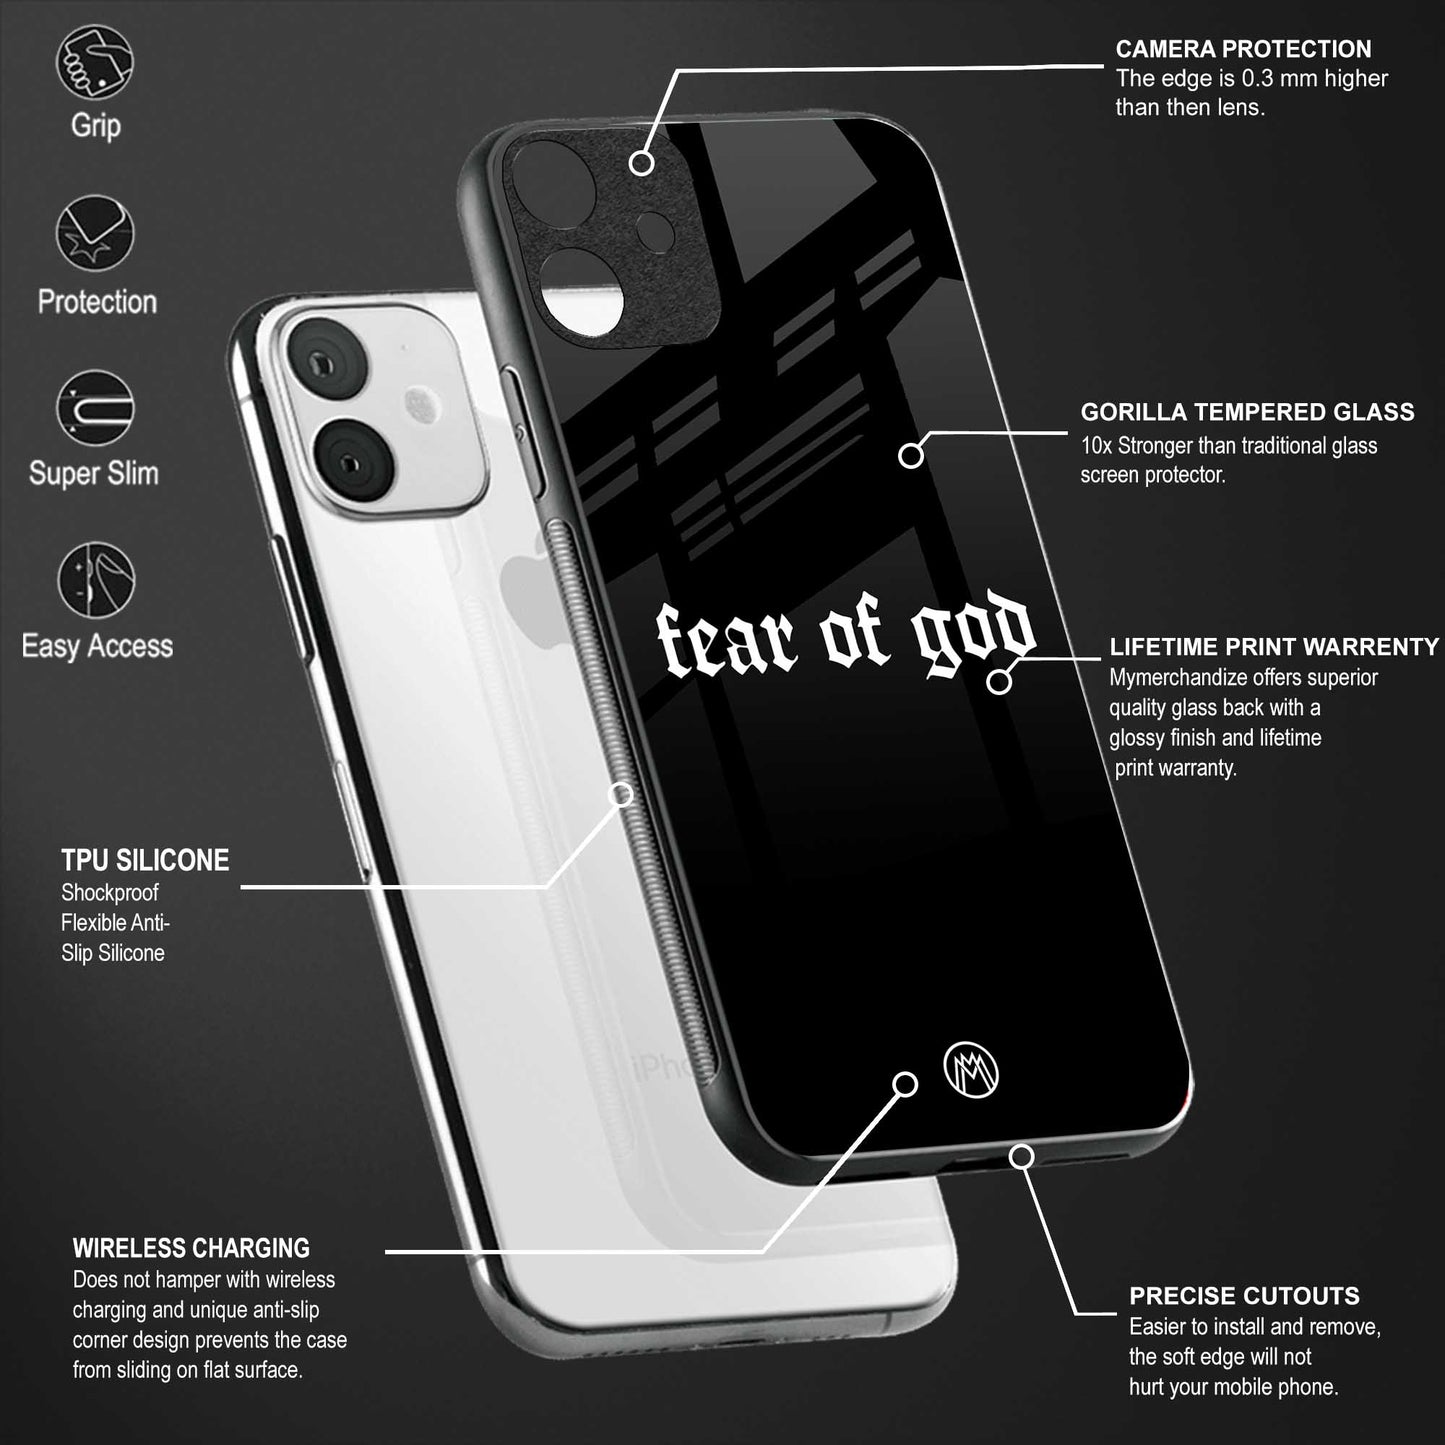 fear of god phone cover for vivo y21s